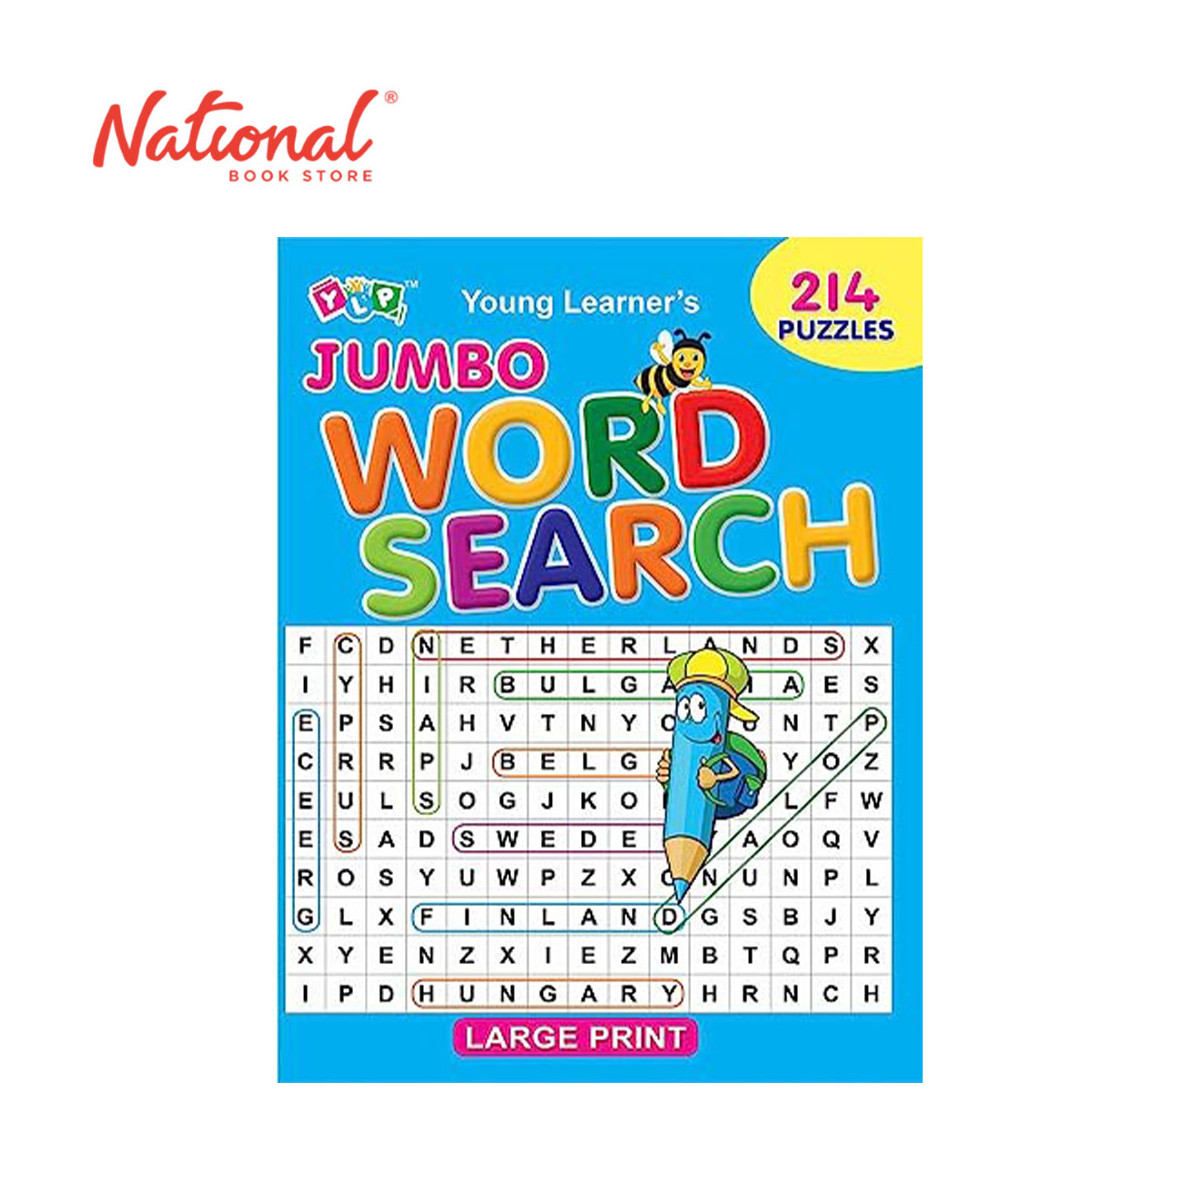 Jumbo Word Search - Trade Paperback - Hobbies for Kids - Puzzles for Kids